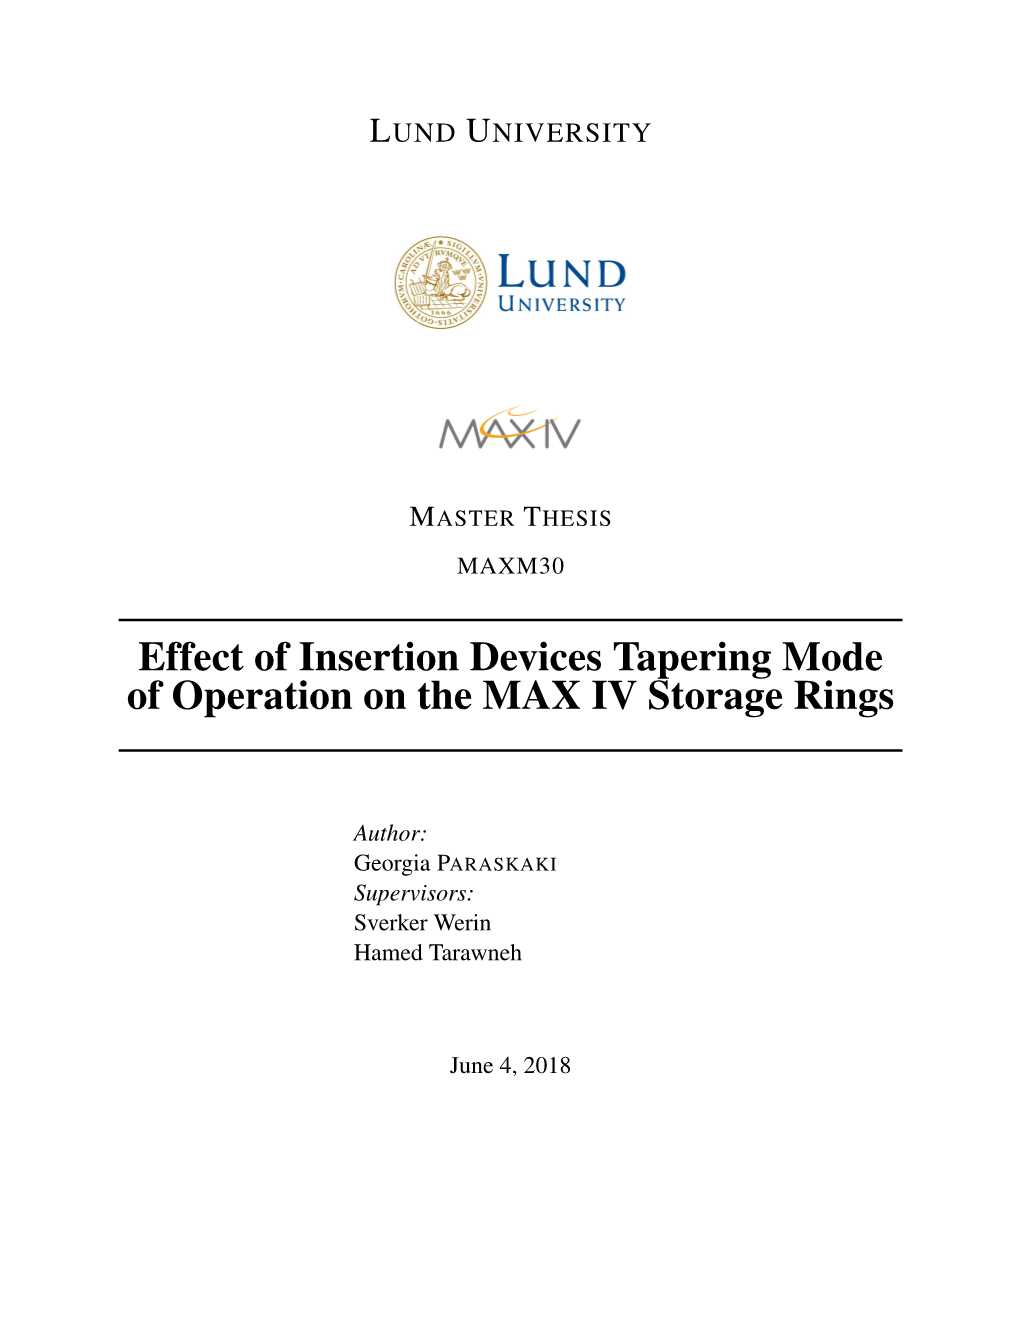 Effect of Insertion Devices Tapering Mode of Operation on the MAX IV Storage Rings